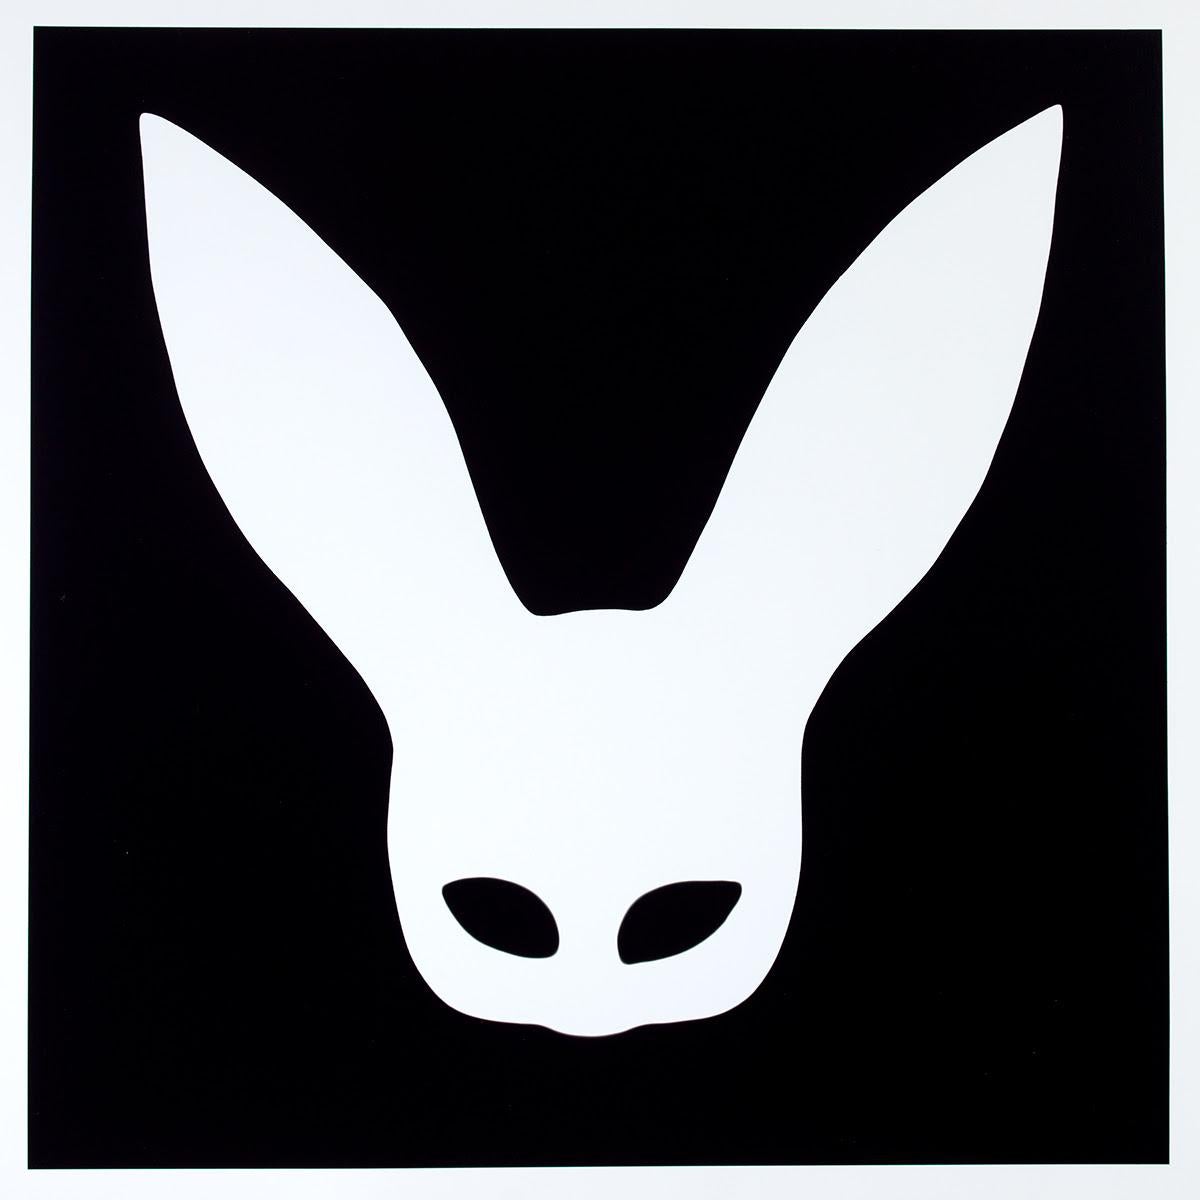 Series: Silhouette
Photogram

"Bunny Photogram this is a Unique piece which is 18 by 18 inches and only one has ever or could ever be made
A photogram is an image made by setting objects directly onto a light-sensitive surface and exposing it to